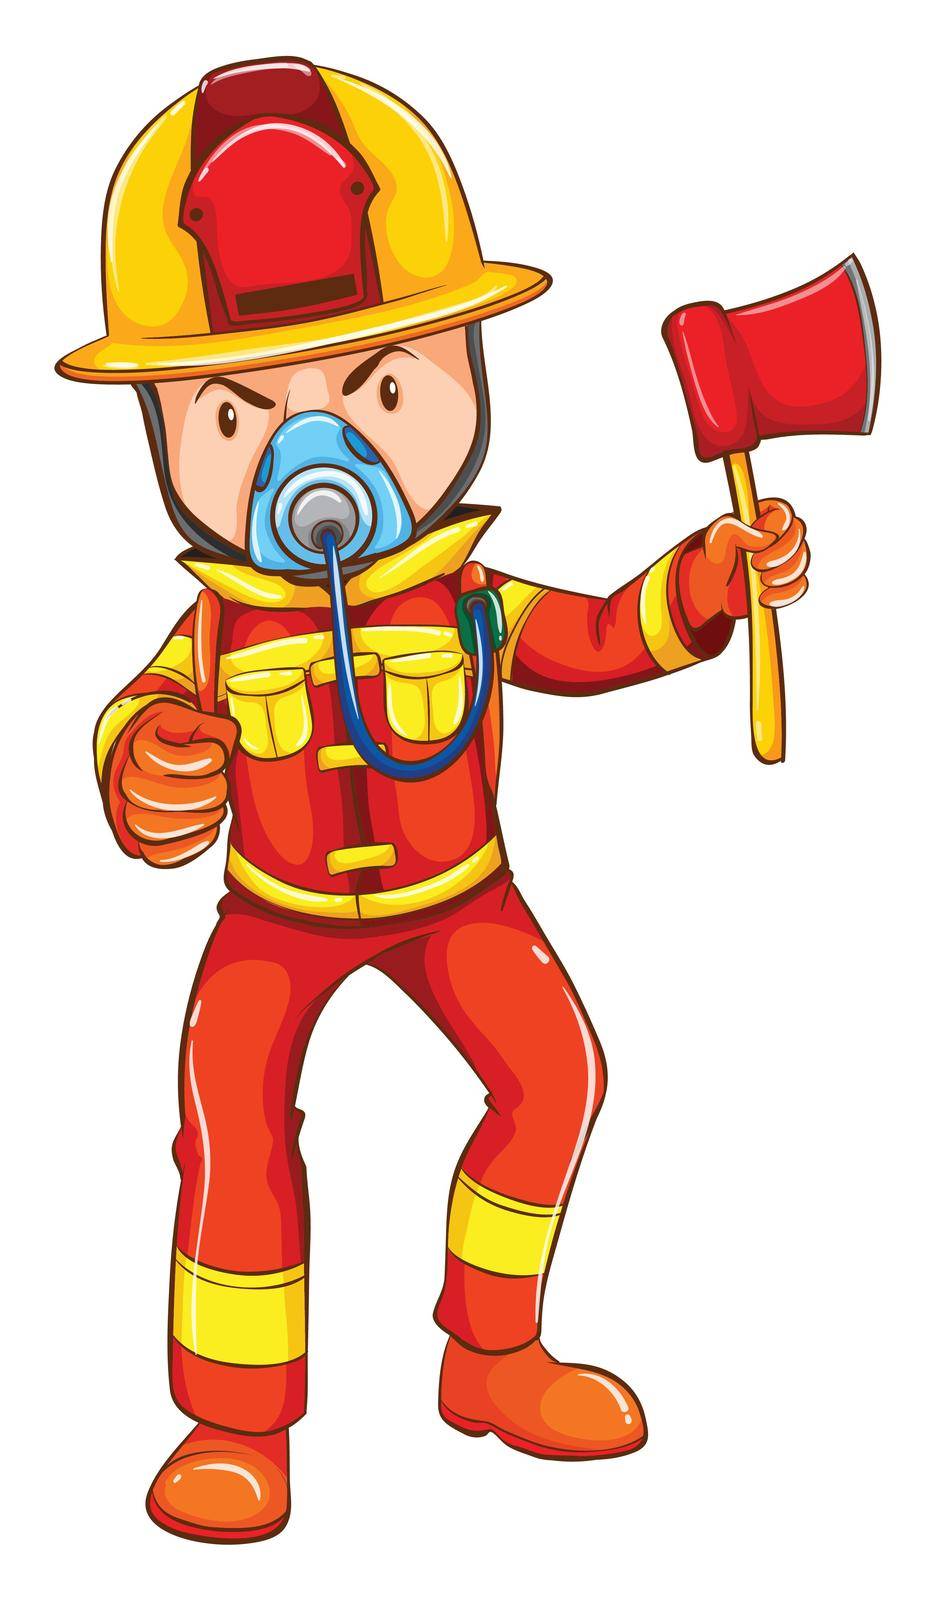 A simple coloured sketch of a fireman by iimages